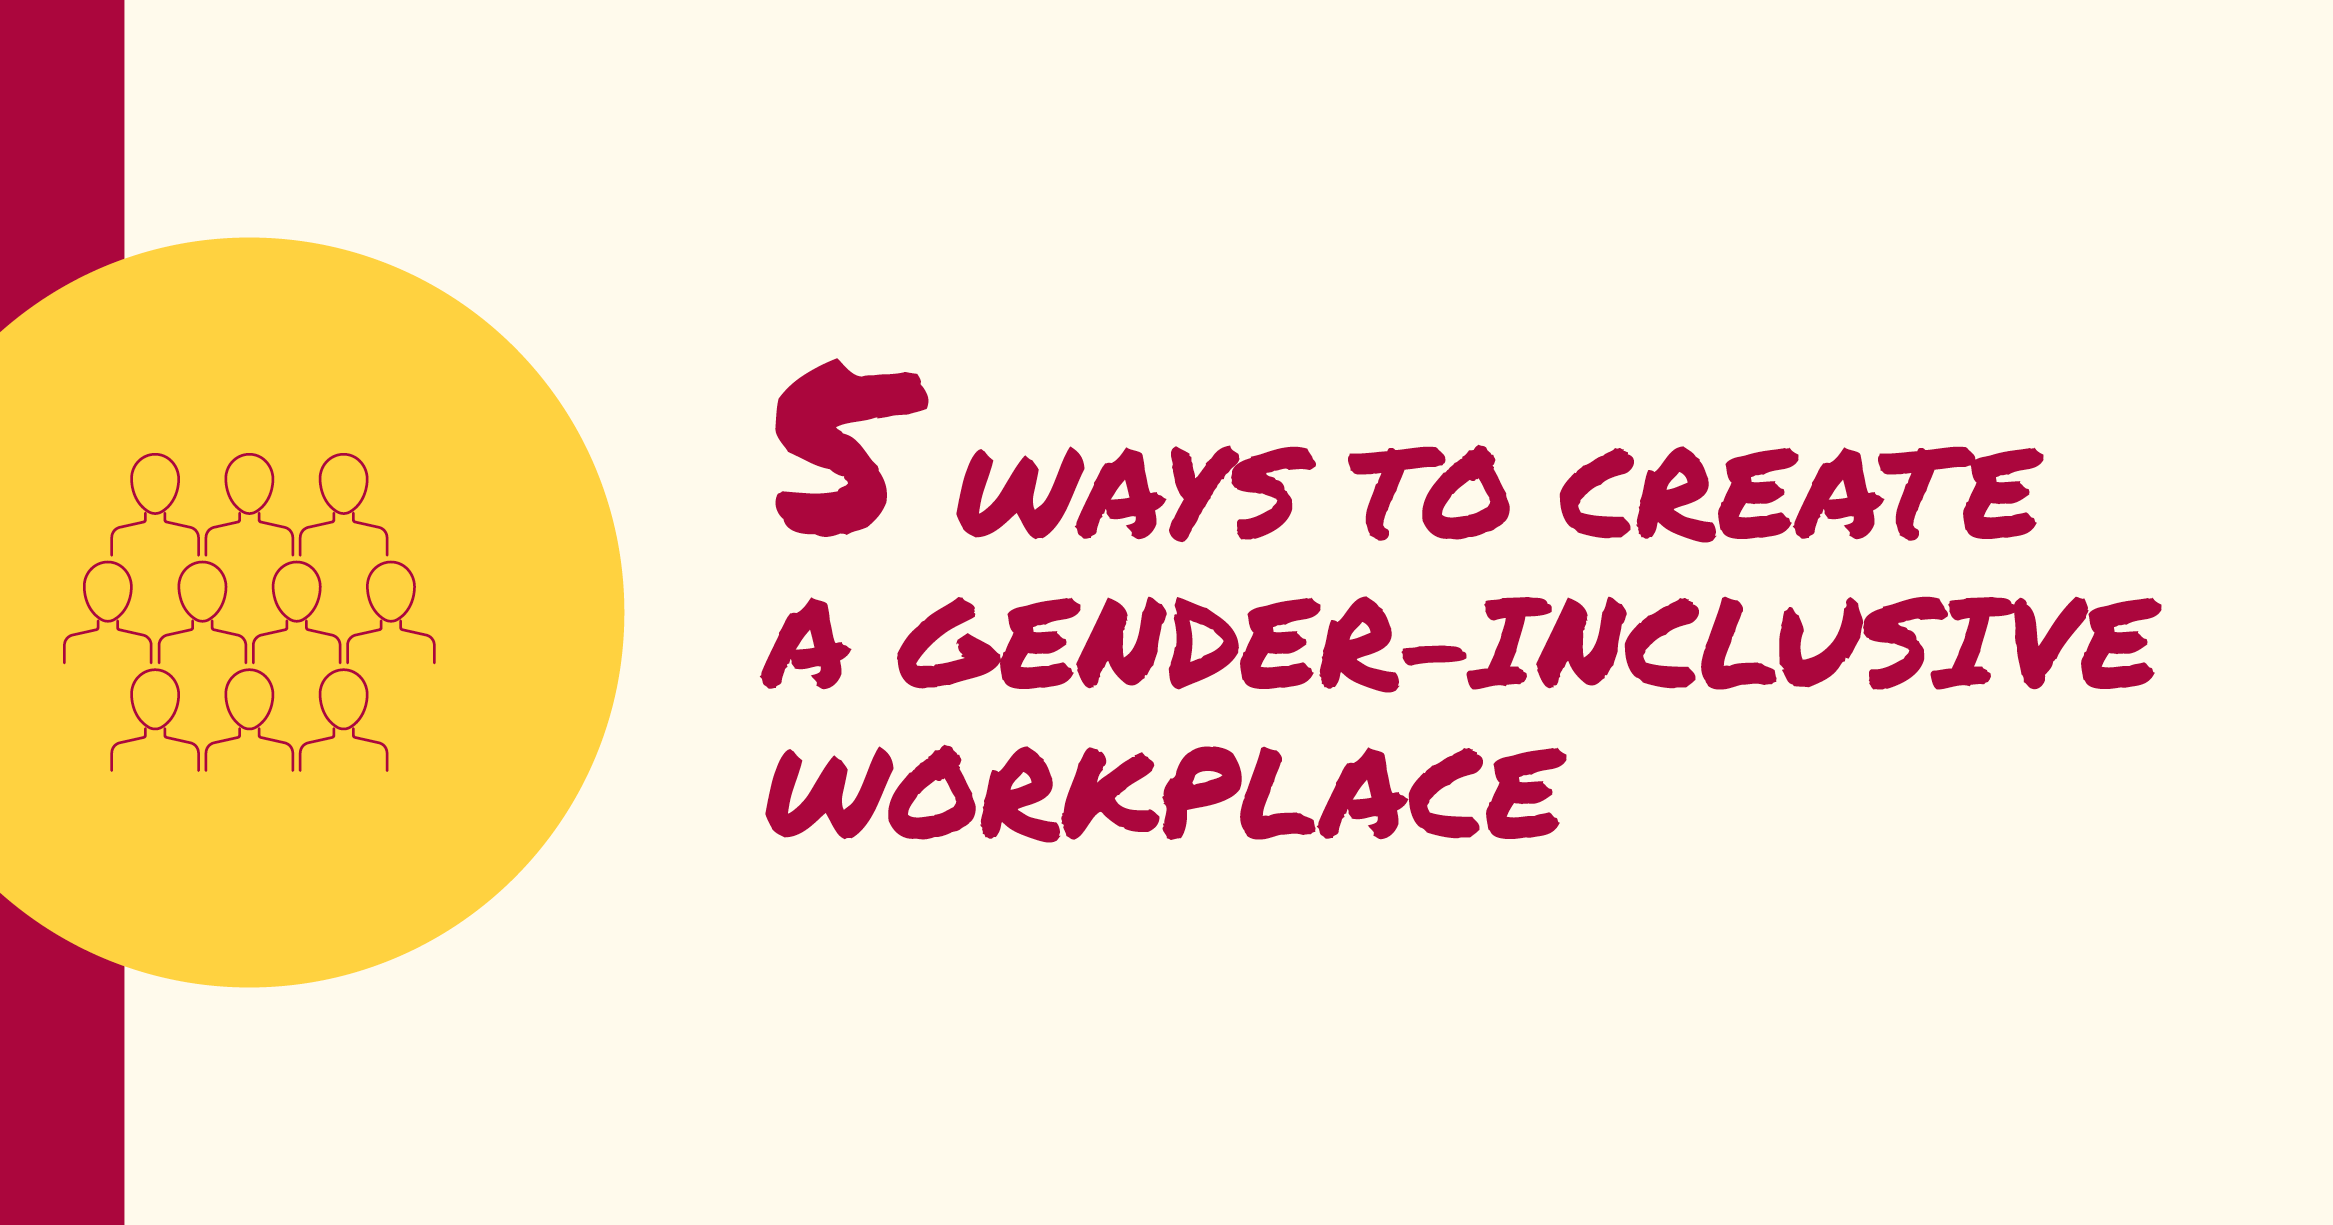 presentation on creation of gender awareness at the workplace